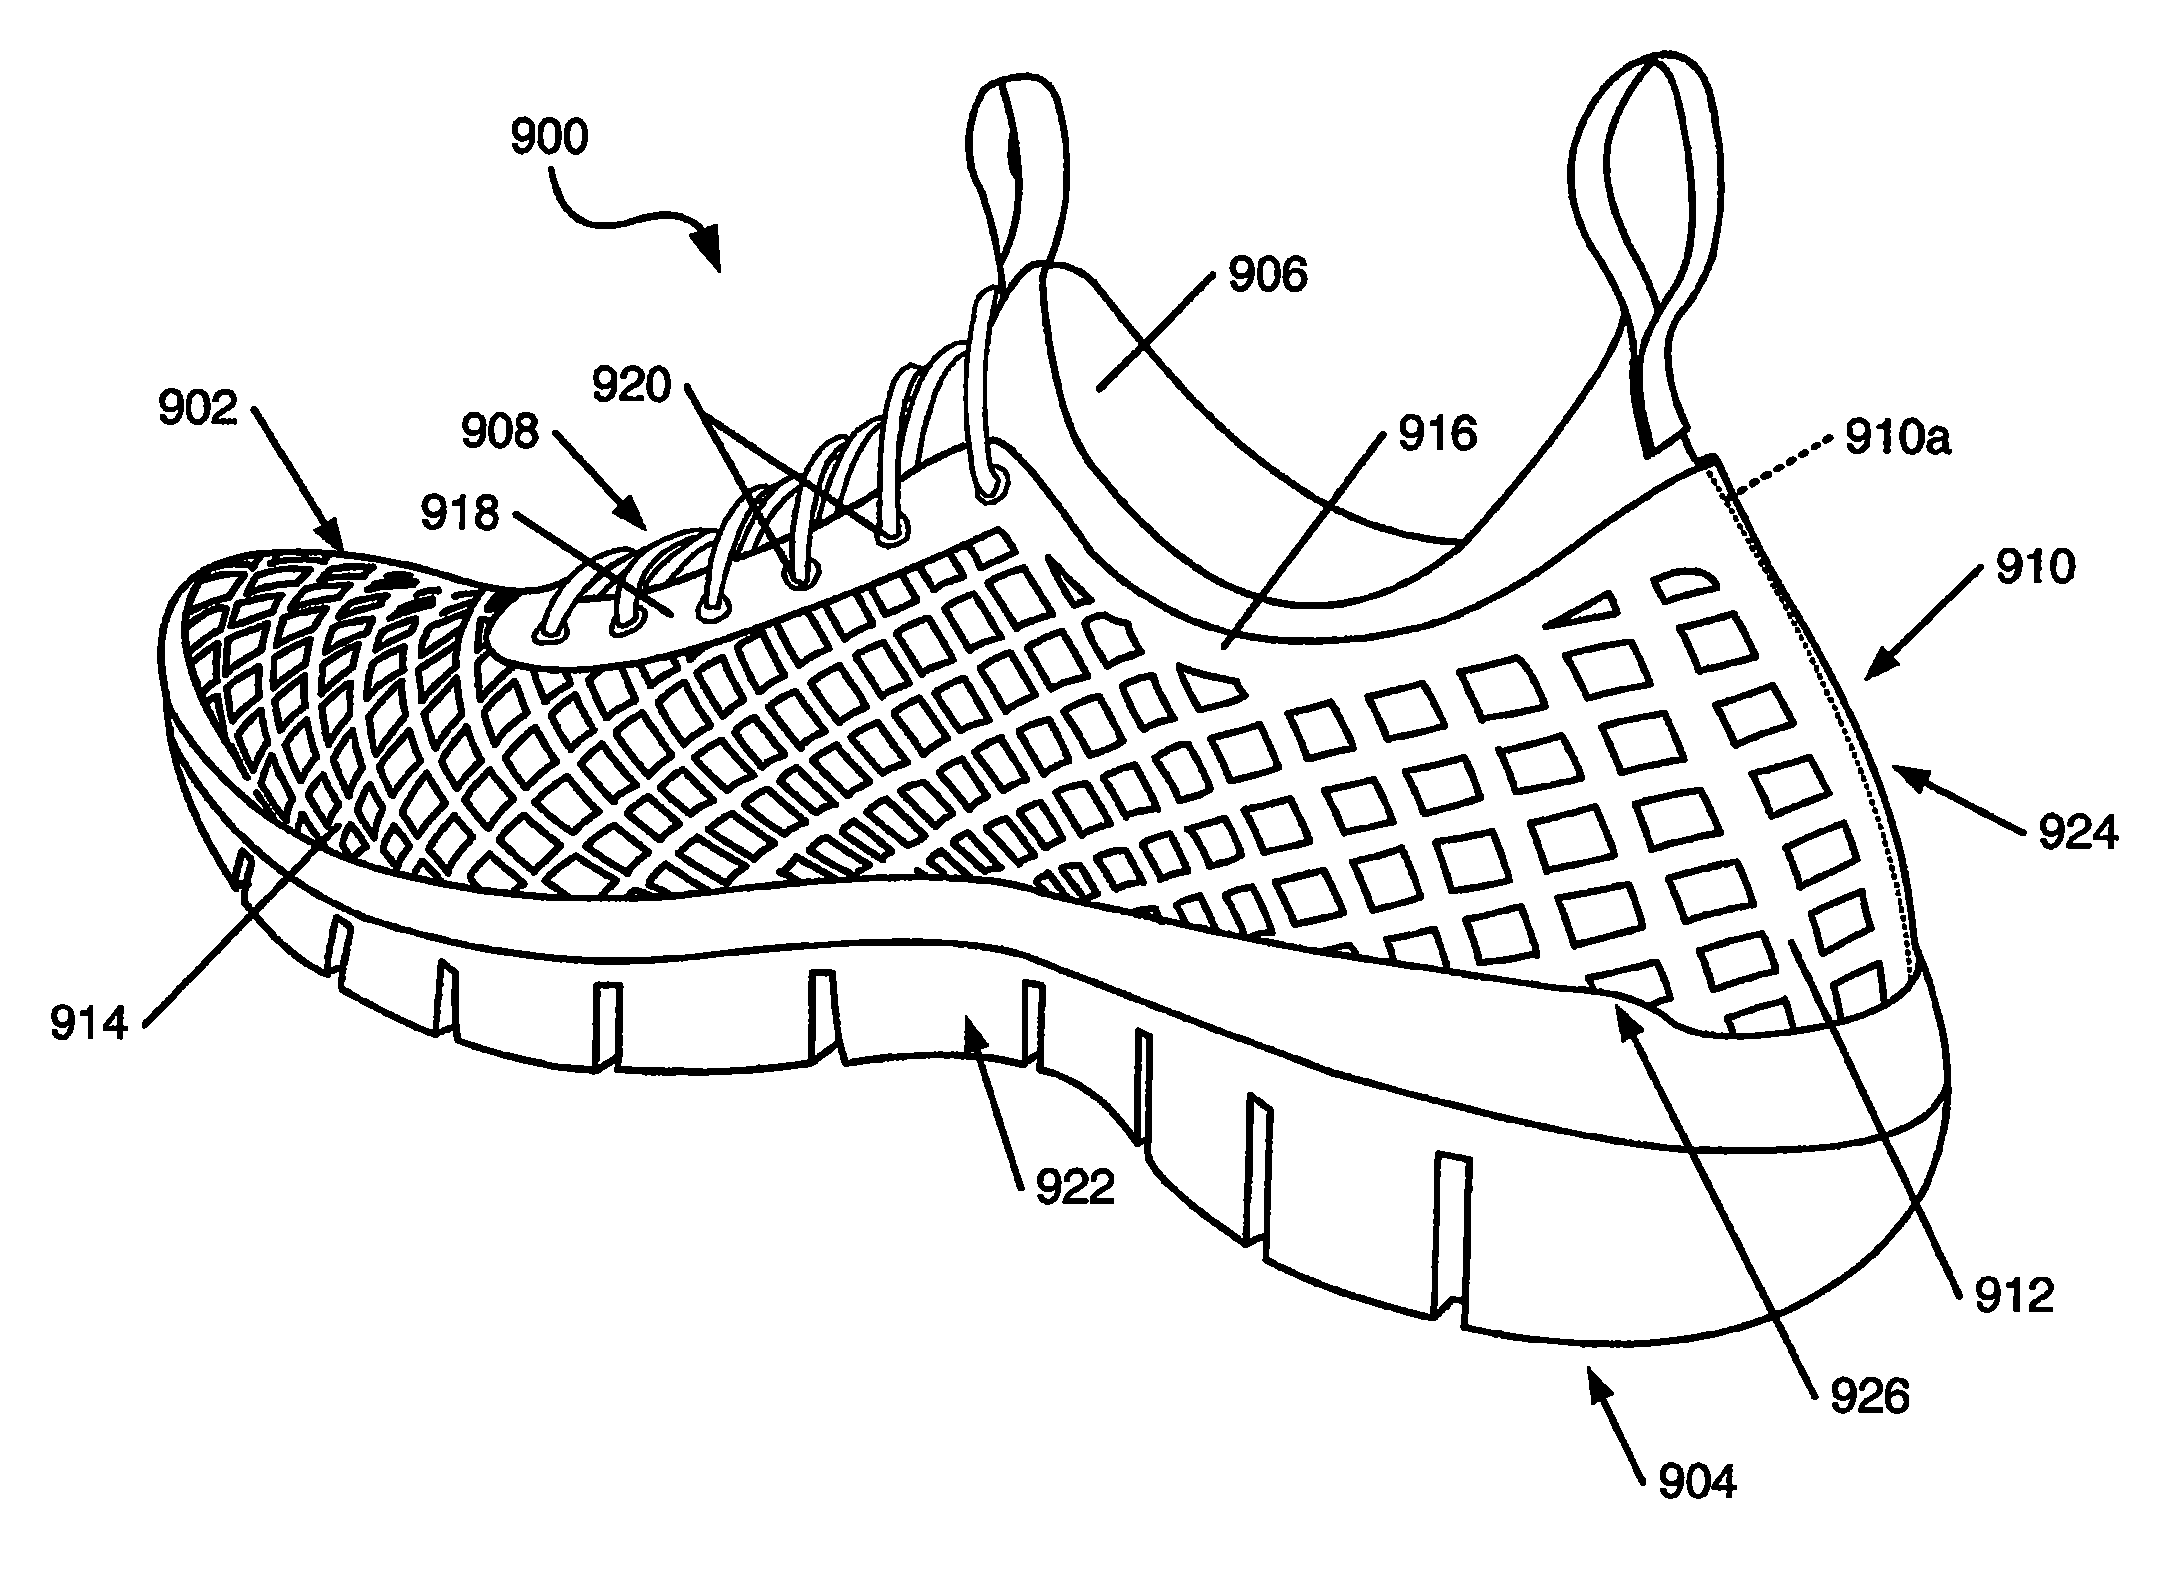 Article of footwear having an upper with a matrix layer